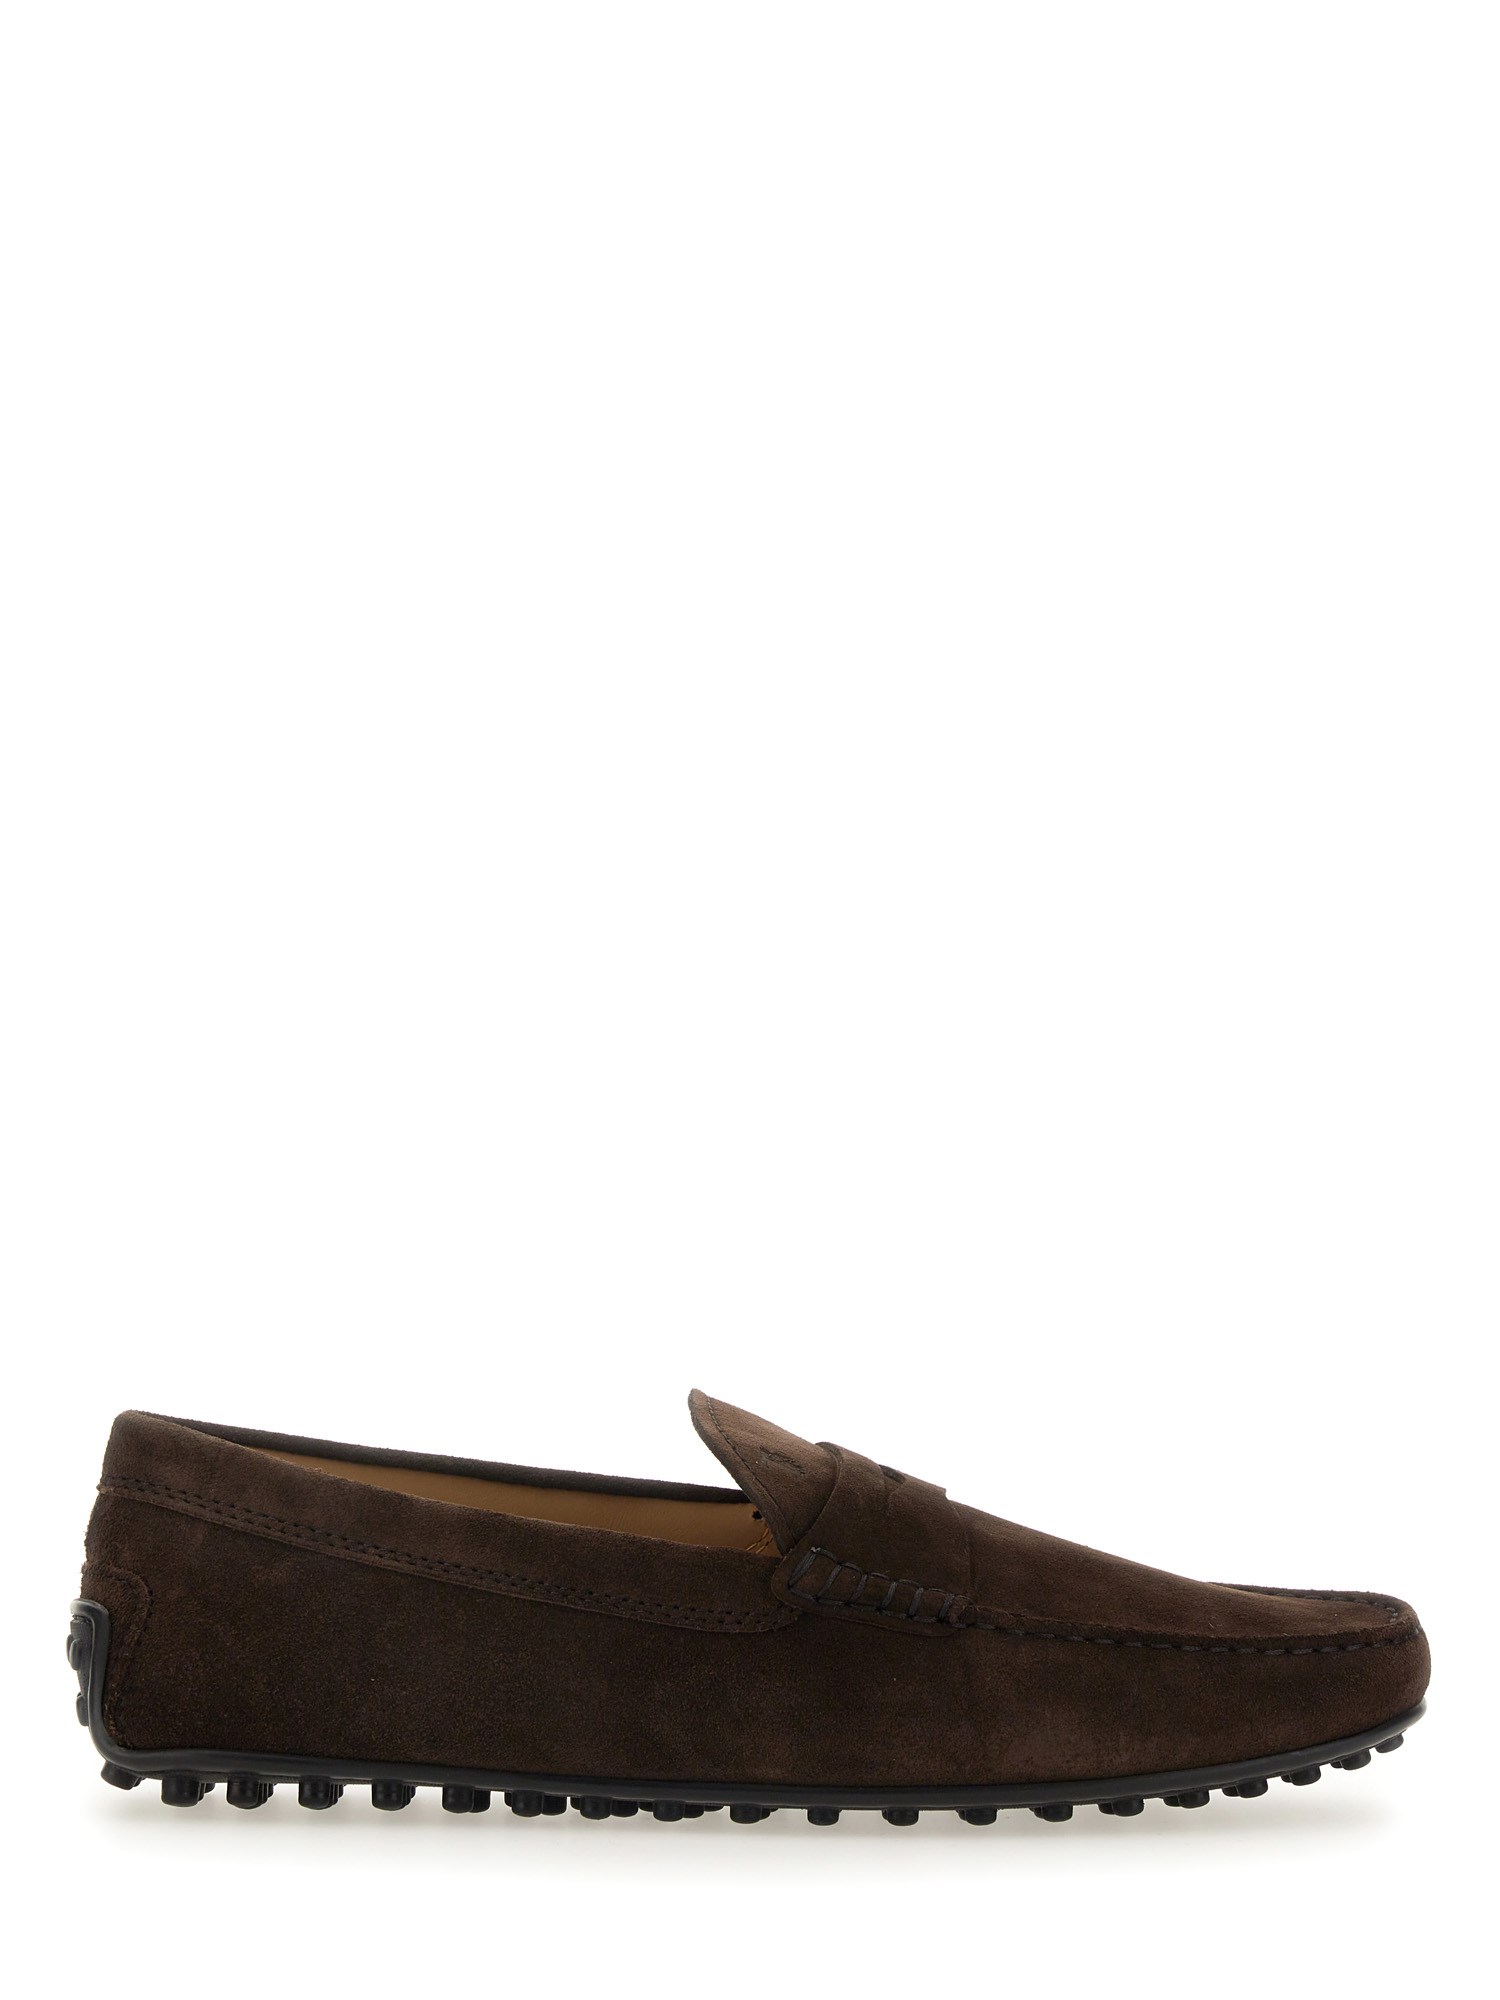 tod's city moccasin